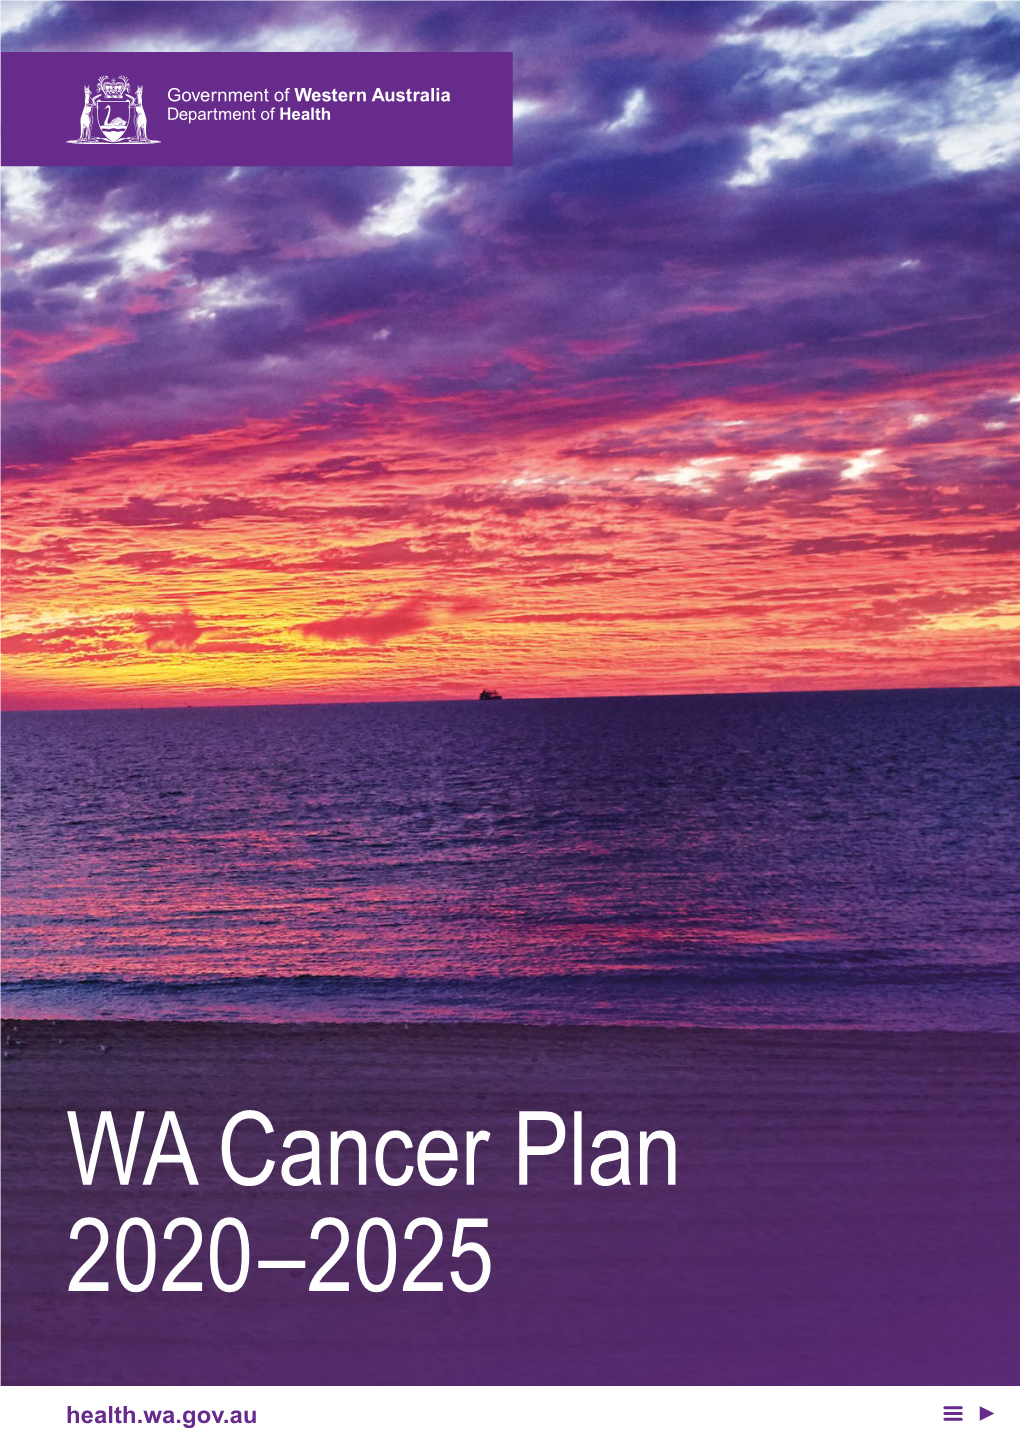 WA Cancer Plan 2020-2025, Implementation of the Strategies Will Need to Be Underpinned by Strong and Clear Principles